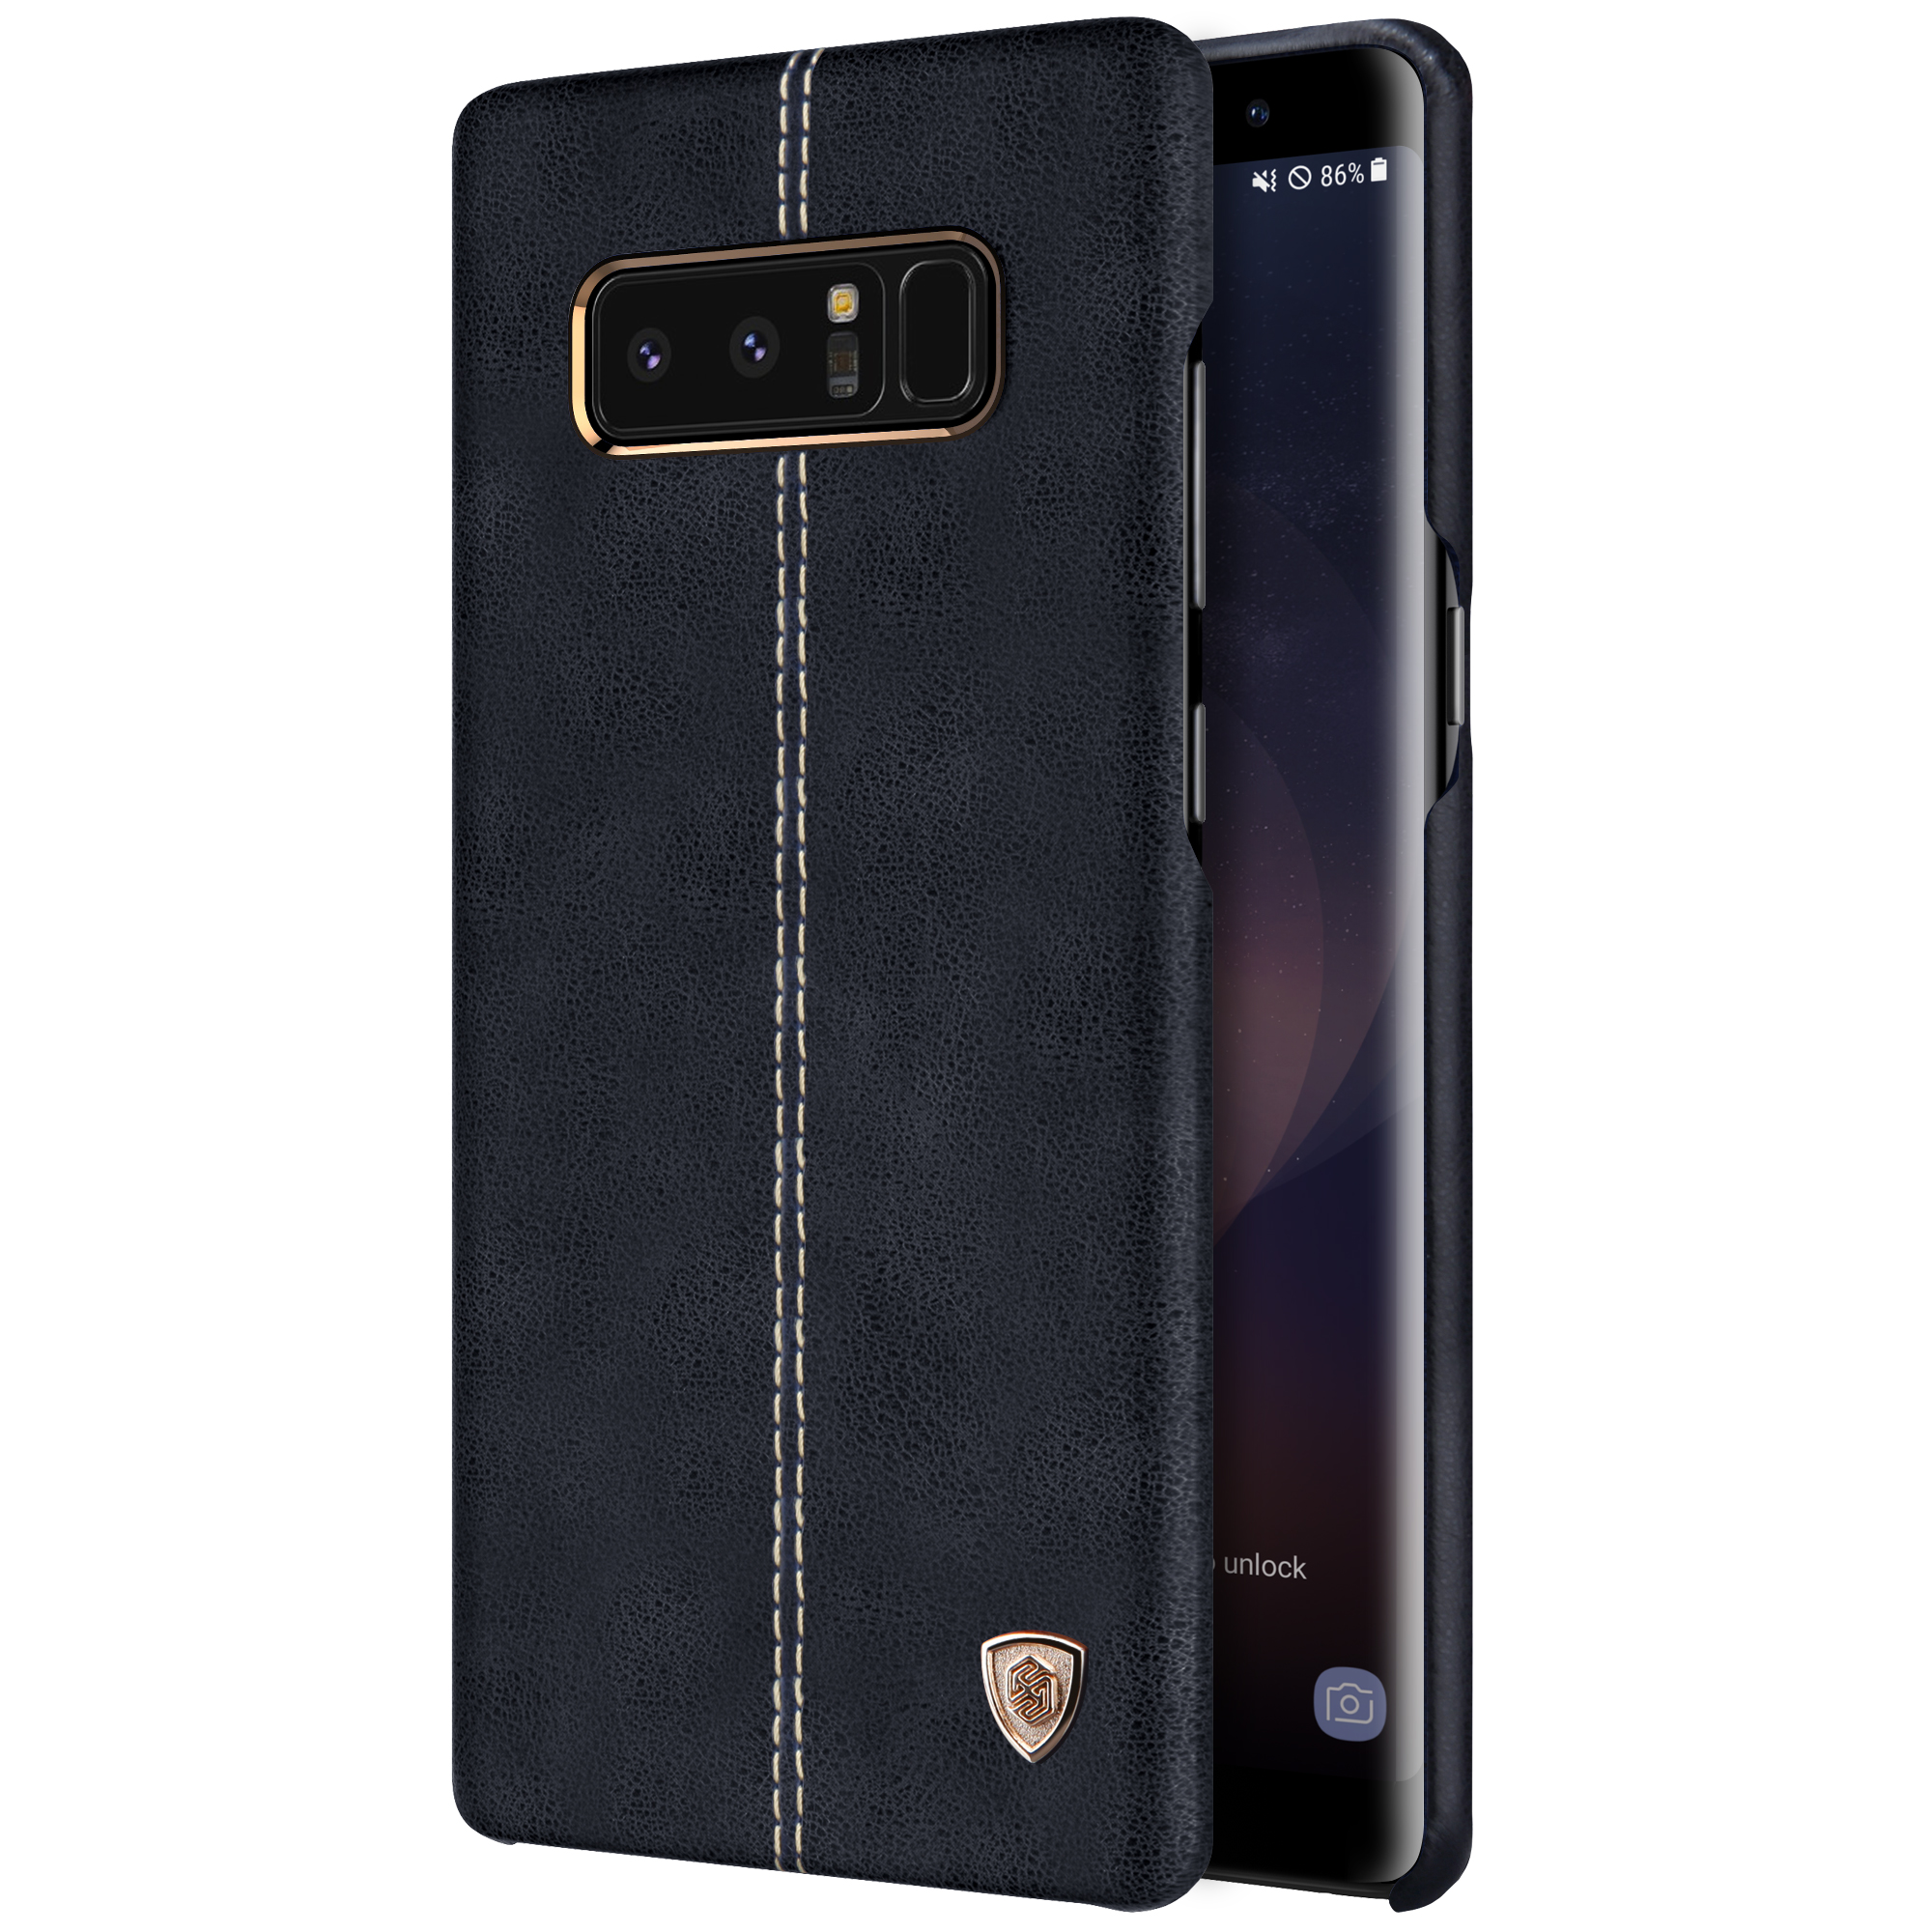 

NILLKIN Englon Crazy Horse Grain Leather Protective Case for Samsung Galaxy Note 8